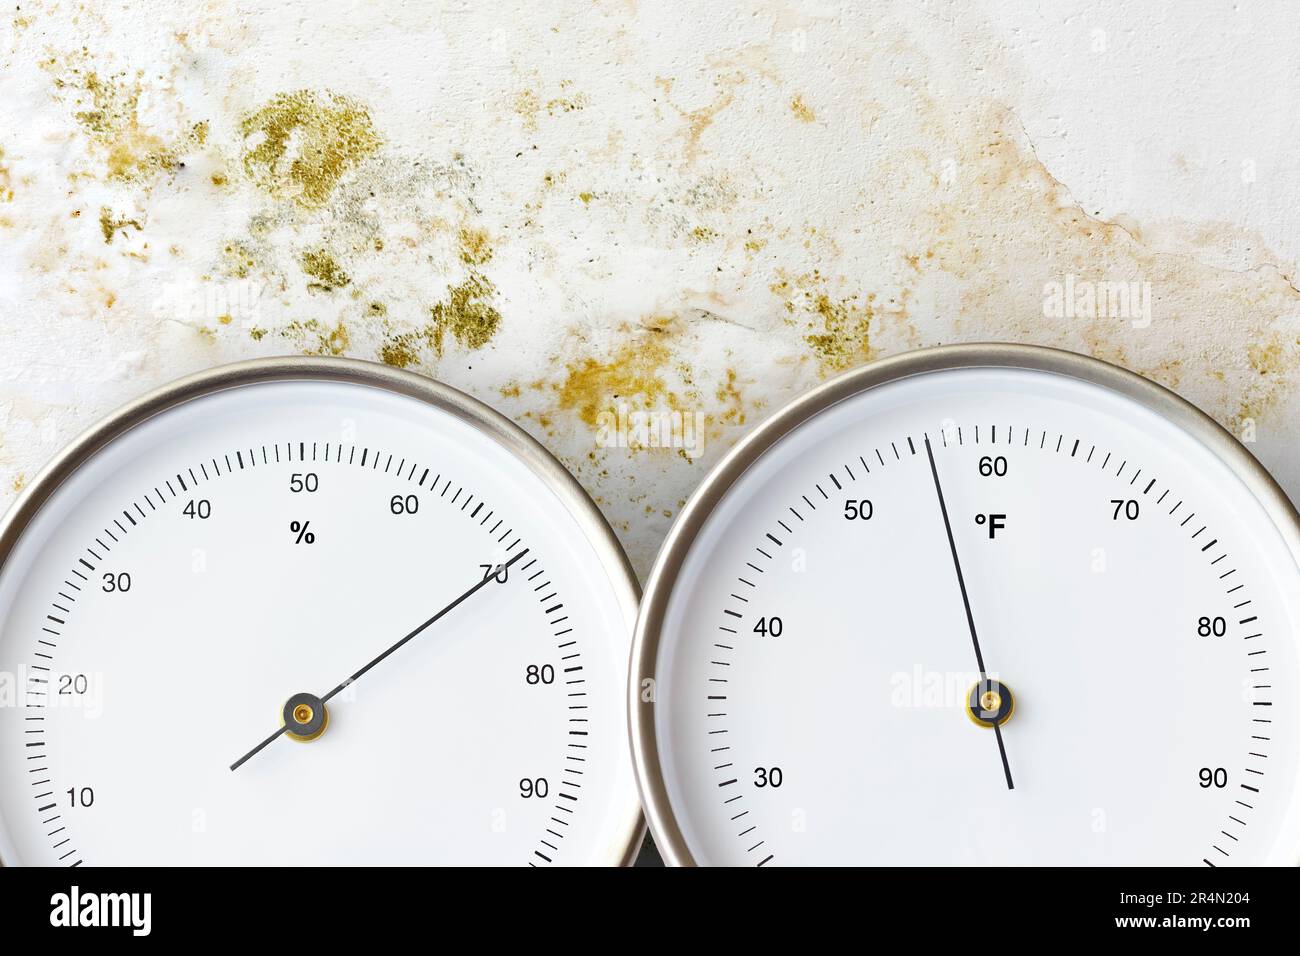 Wall overgrown with mold or mildew with analog thermometer indicating 56 degrees FAHRENHEIT and a hygrometer measuring 70 percent relative humidity. Stock Photo